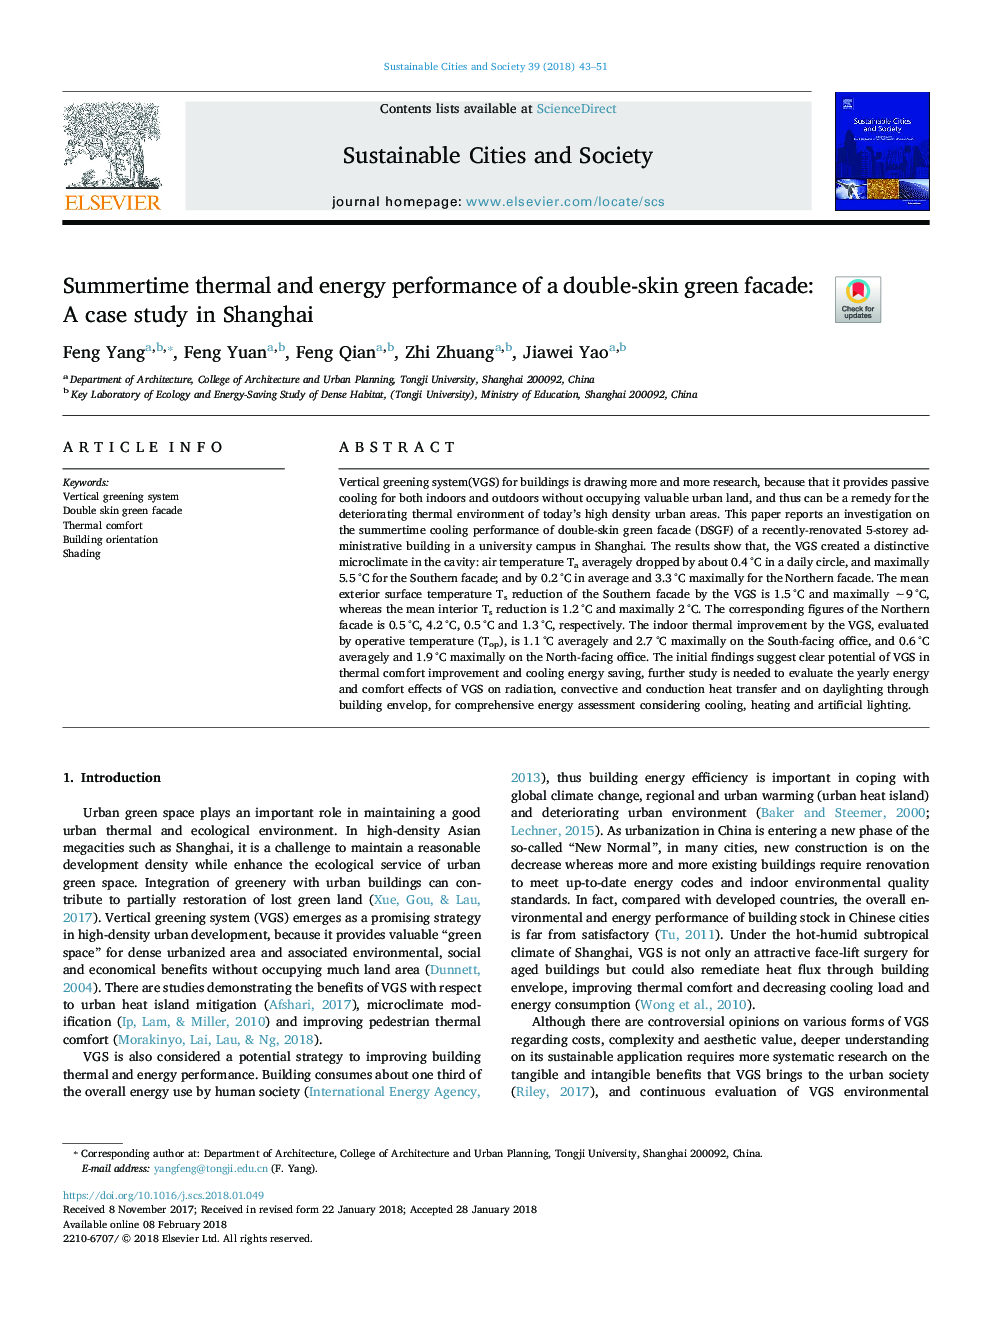 Summertime thermal and energy performance of a double-skin green facade: A case study in Shanghai